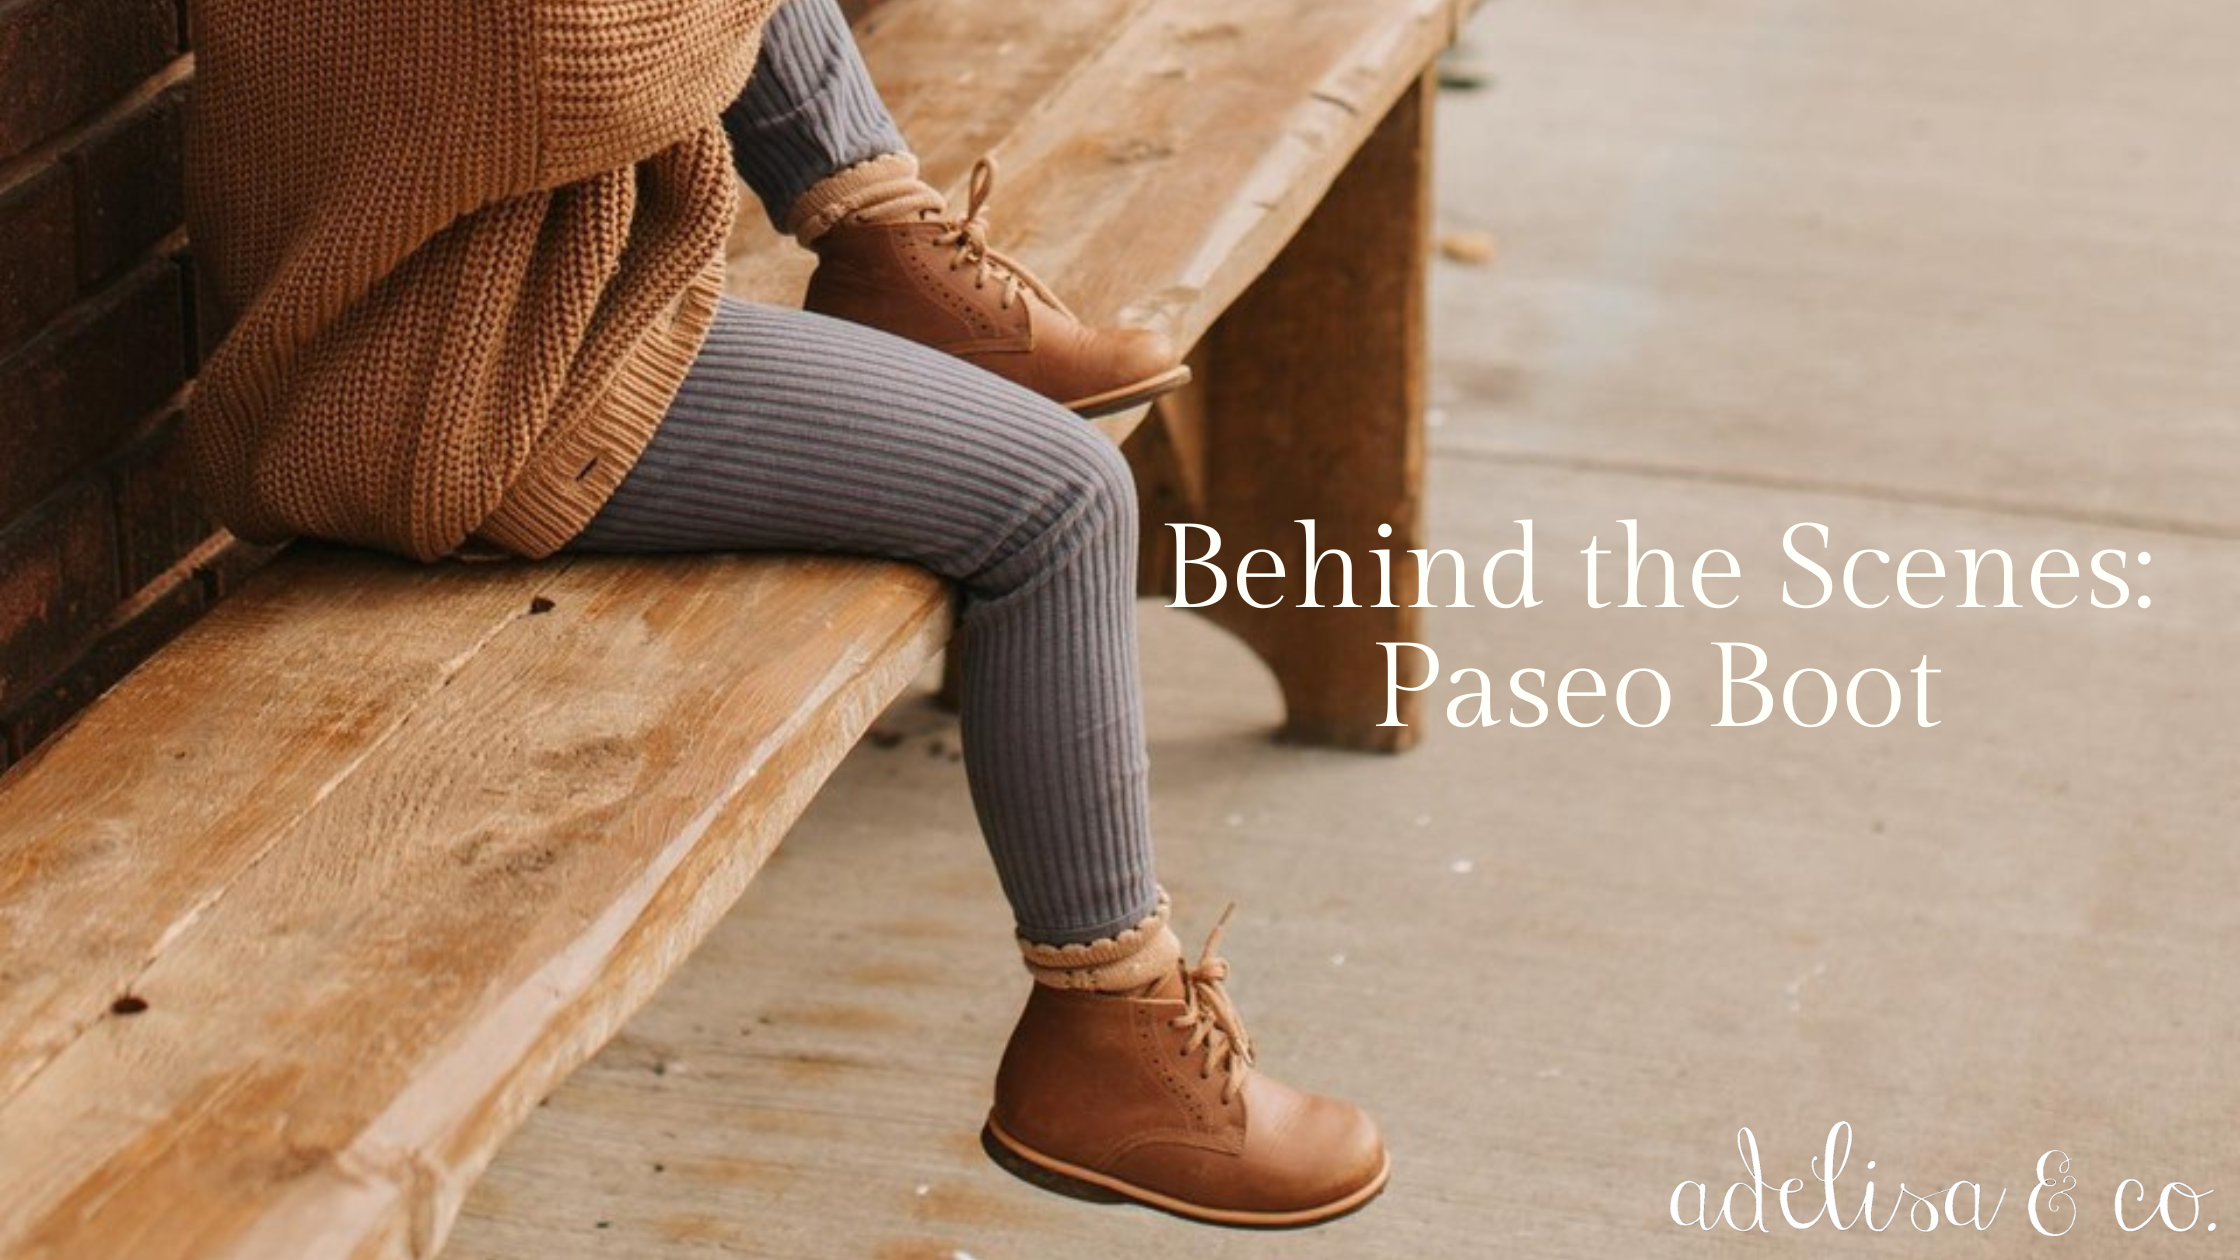 Behind the scenes: Paseo